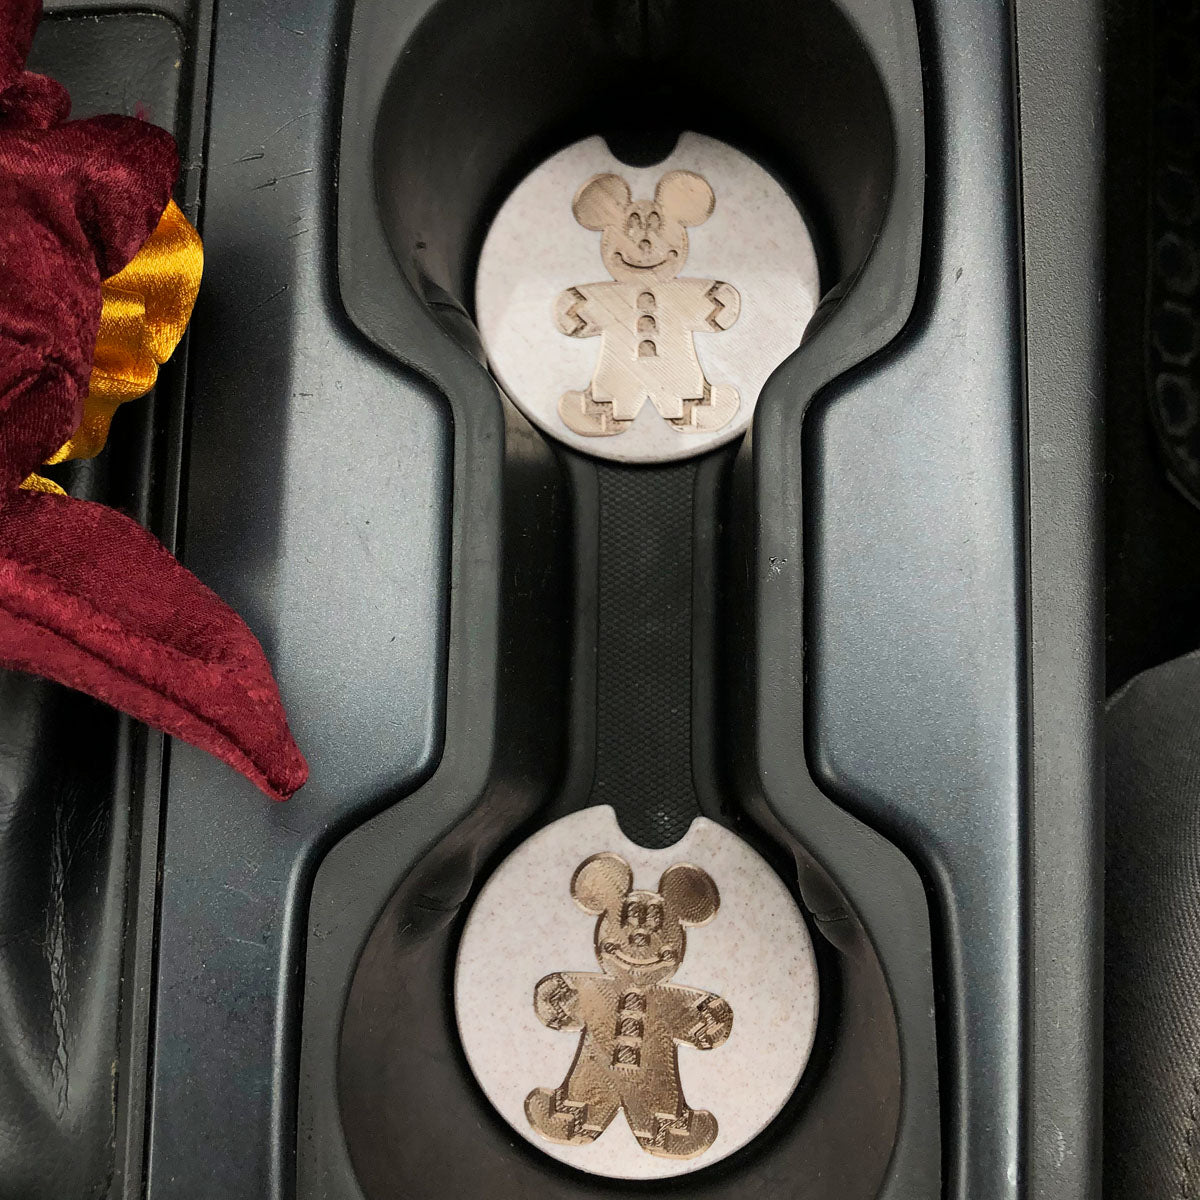 Gingerbread Mouse Car Coasters - Set of 2 - CLEARANCE